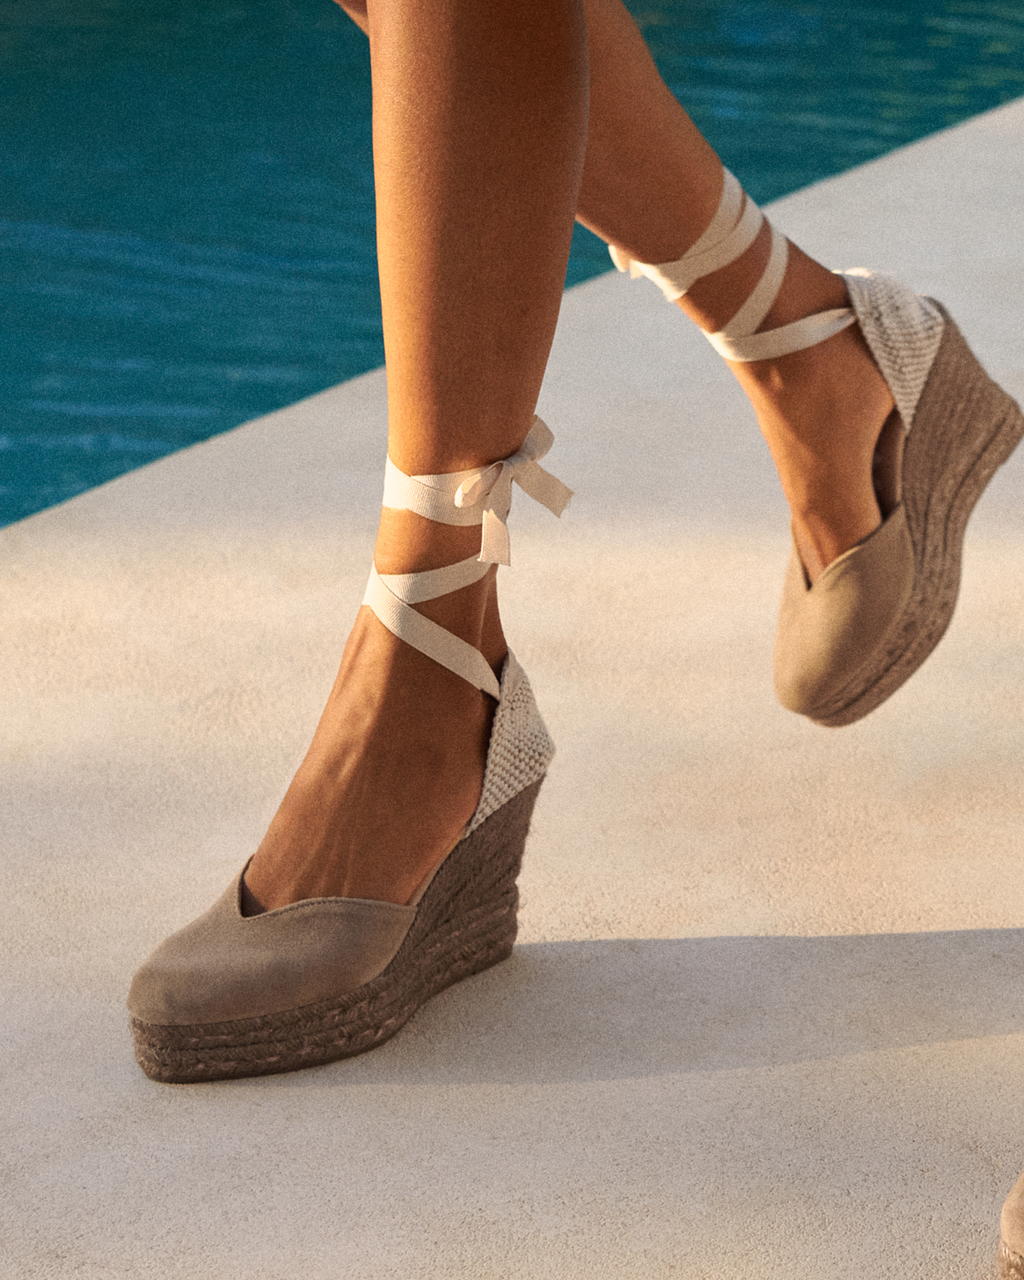 Soft Suede Heart-Shaped|Wedge Espadrilles - Hamptons Vintage Taupe On Tone